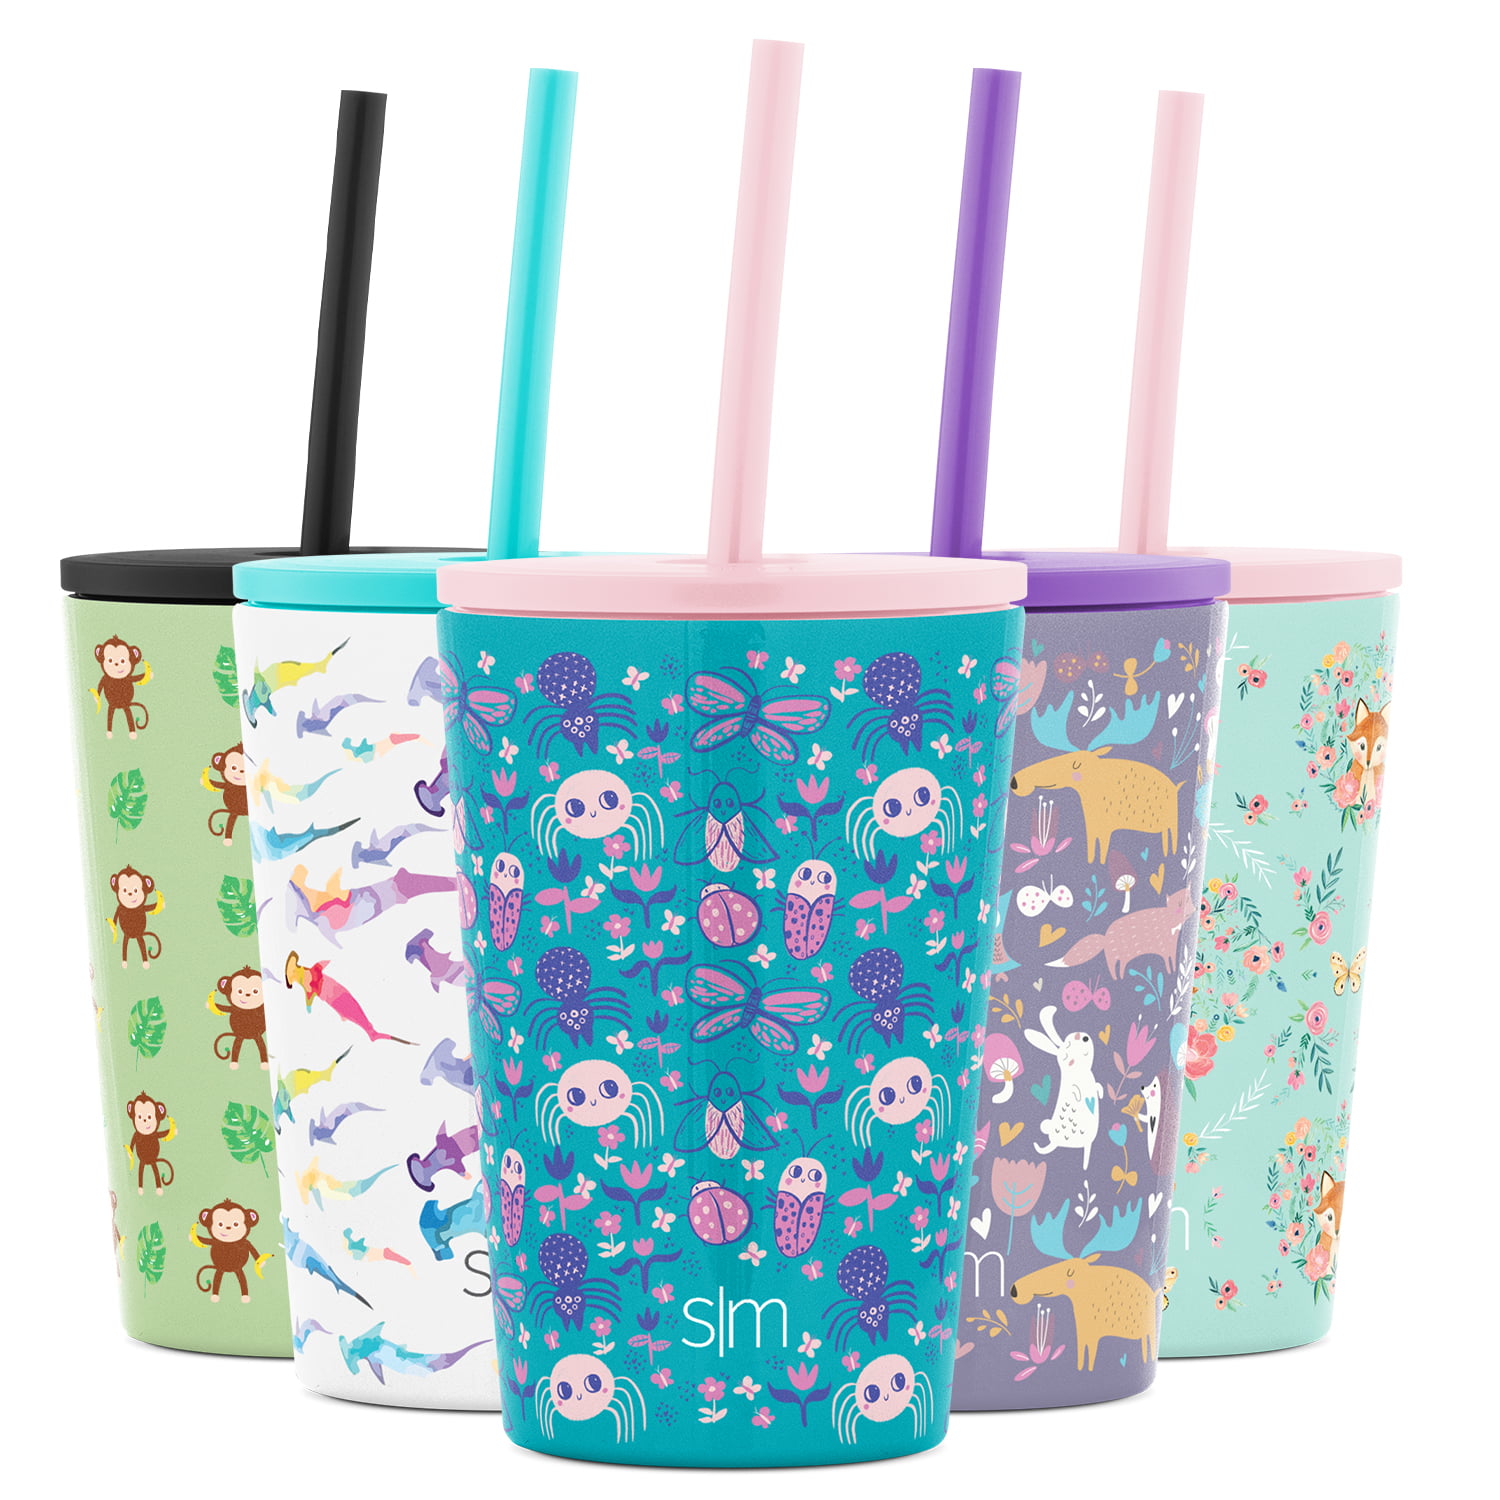 Zubebe 6 Pack Kids Cups with Straw Lid Toddler Smoothie Cup  Spill Proof Vacuum Stainless Steel Insulated Tumbler Water Bottle for Kids  Girls Boys (12 oz): Tumblers & Water Glasses